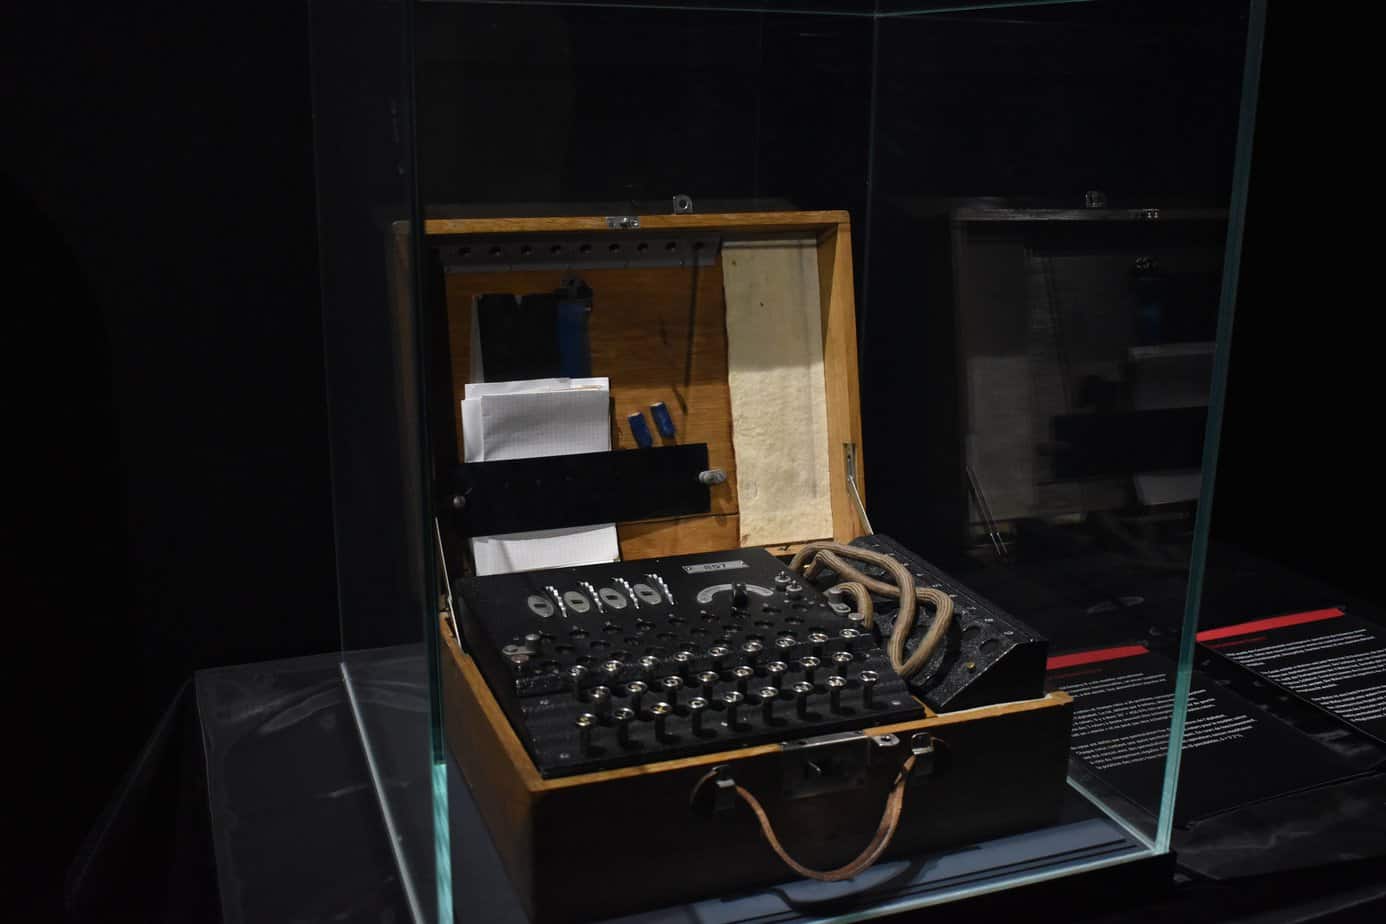 Who were the scientists who “broke” the Enigma?